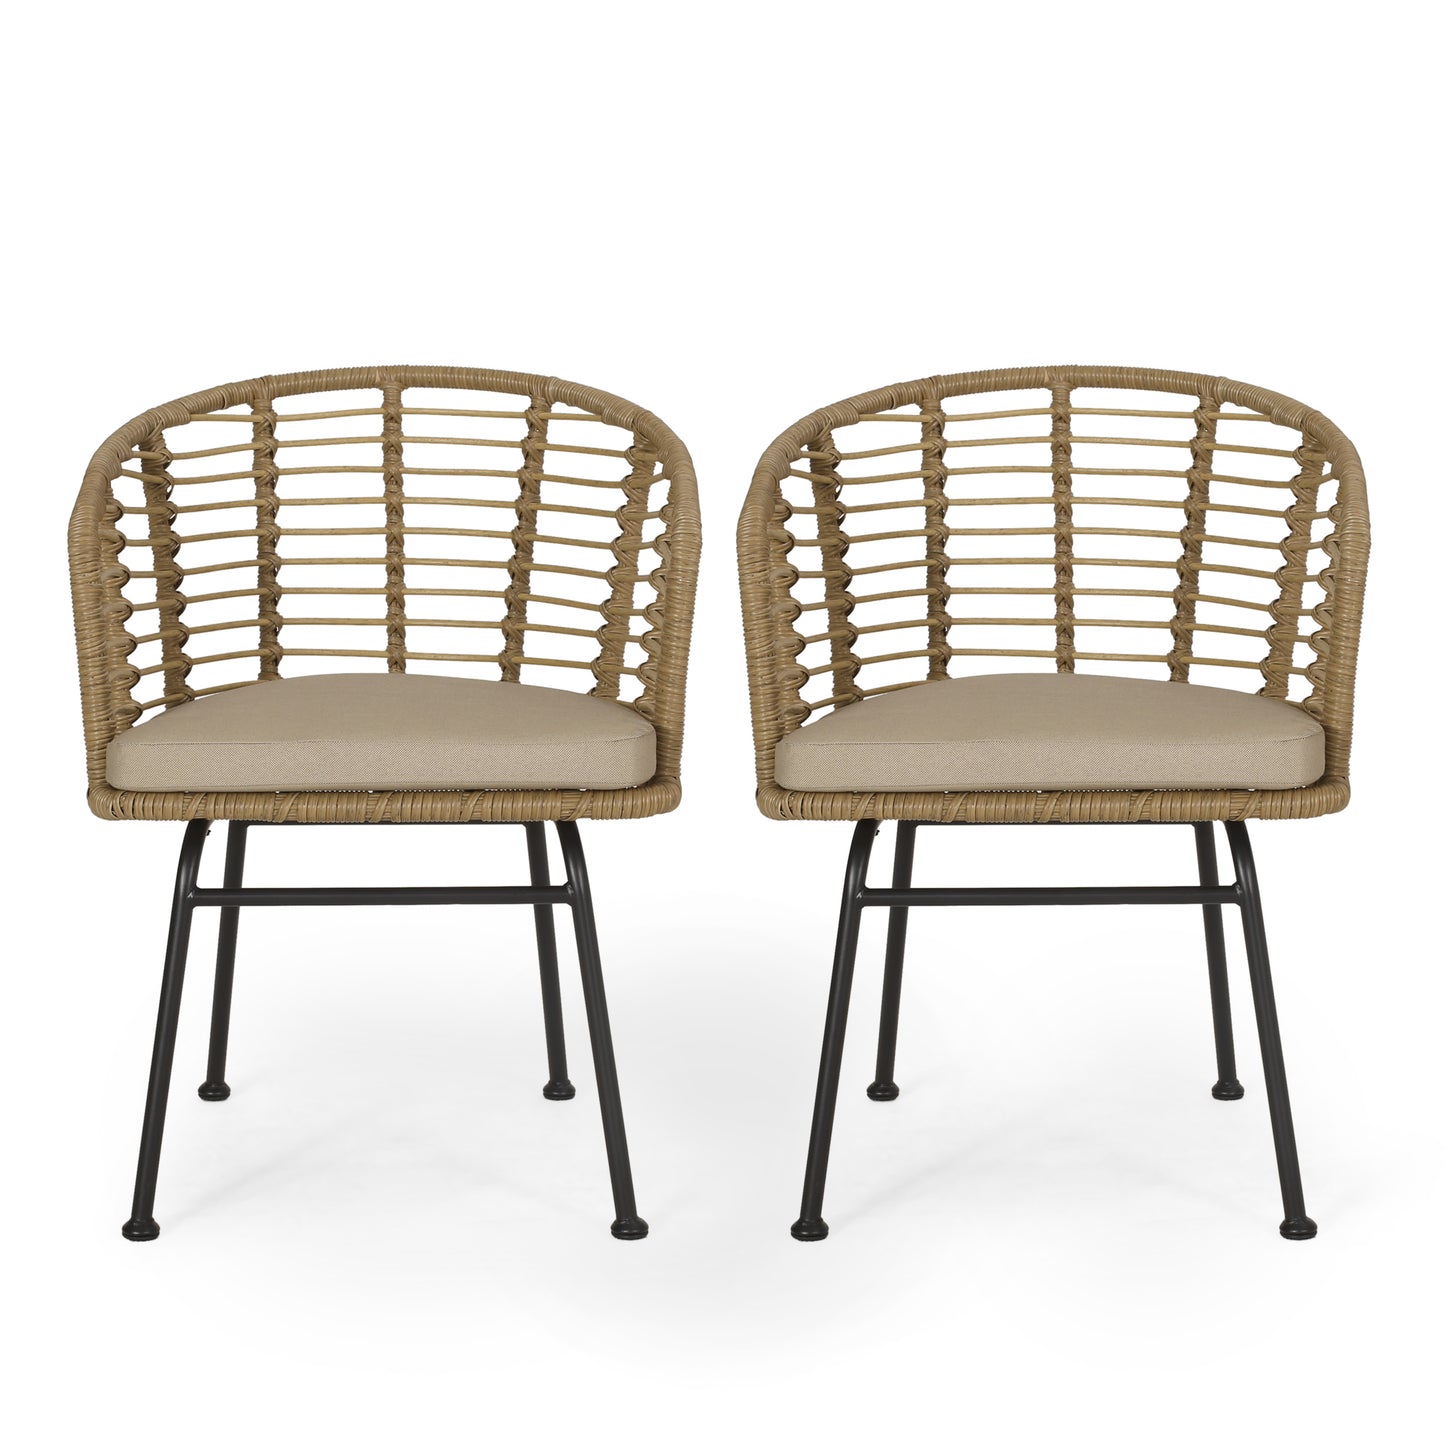 Monture Outdoor Wicker Chair with Water Resistant Cushion, Set of 2, Light Brown and Beige